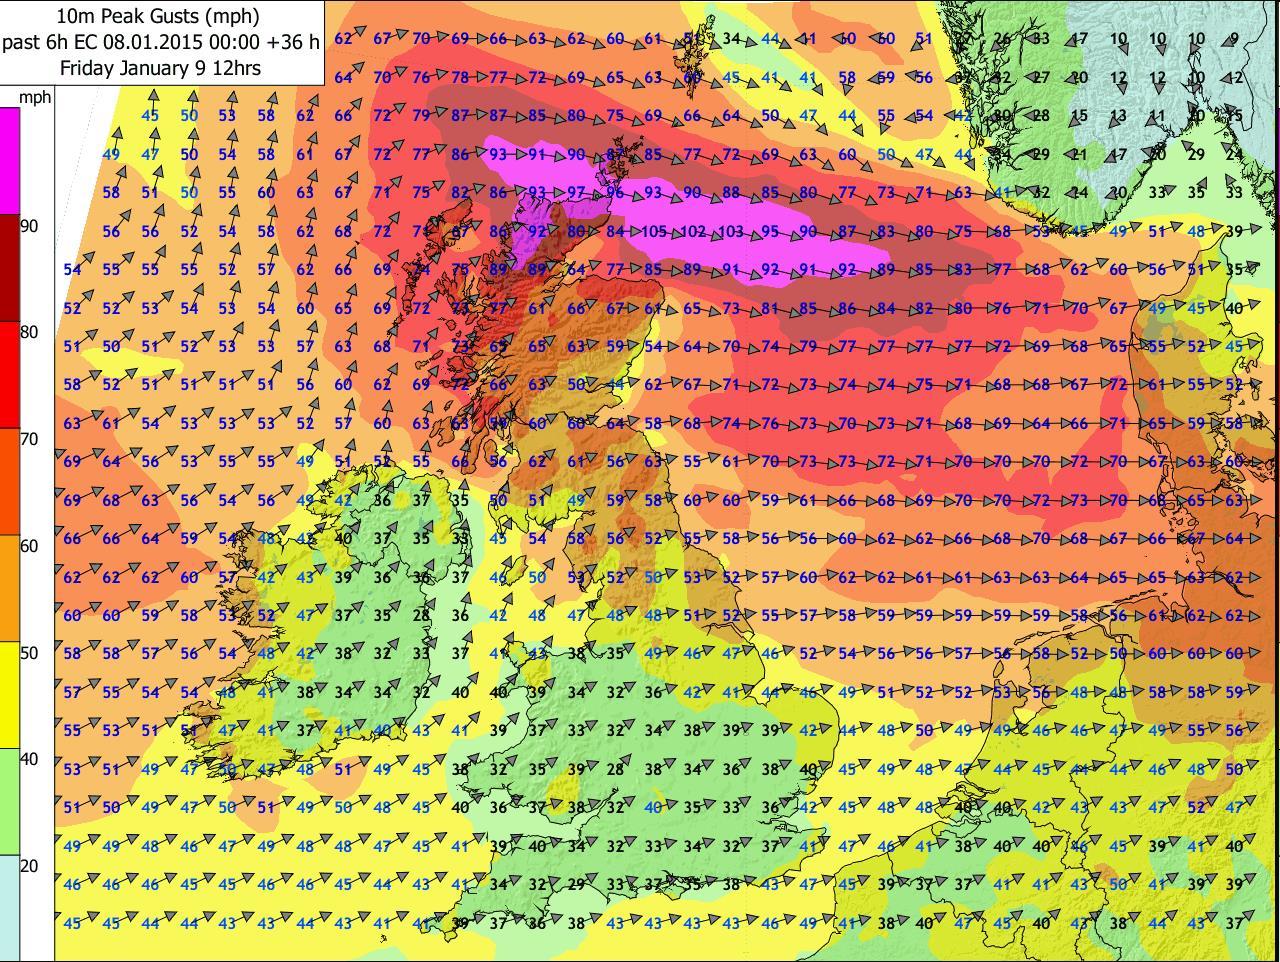 A map of expected wind speeds across the UK at midday on Friday January 9